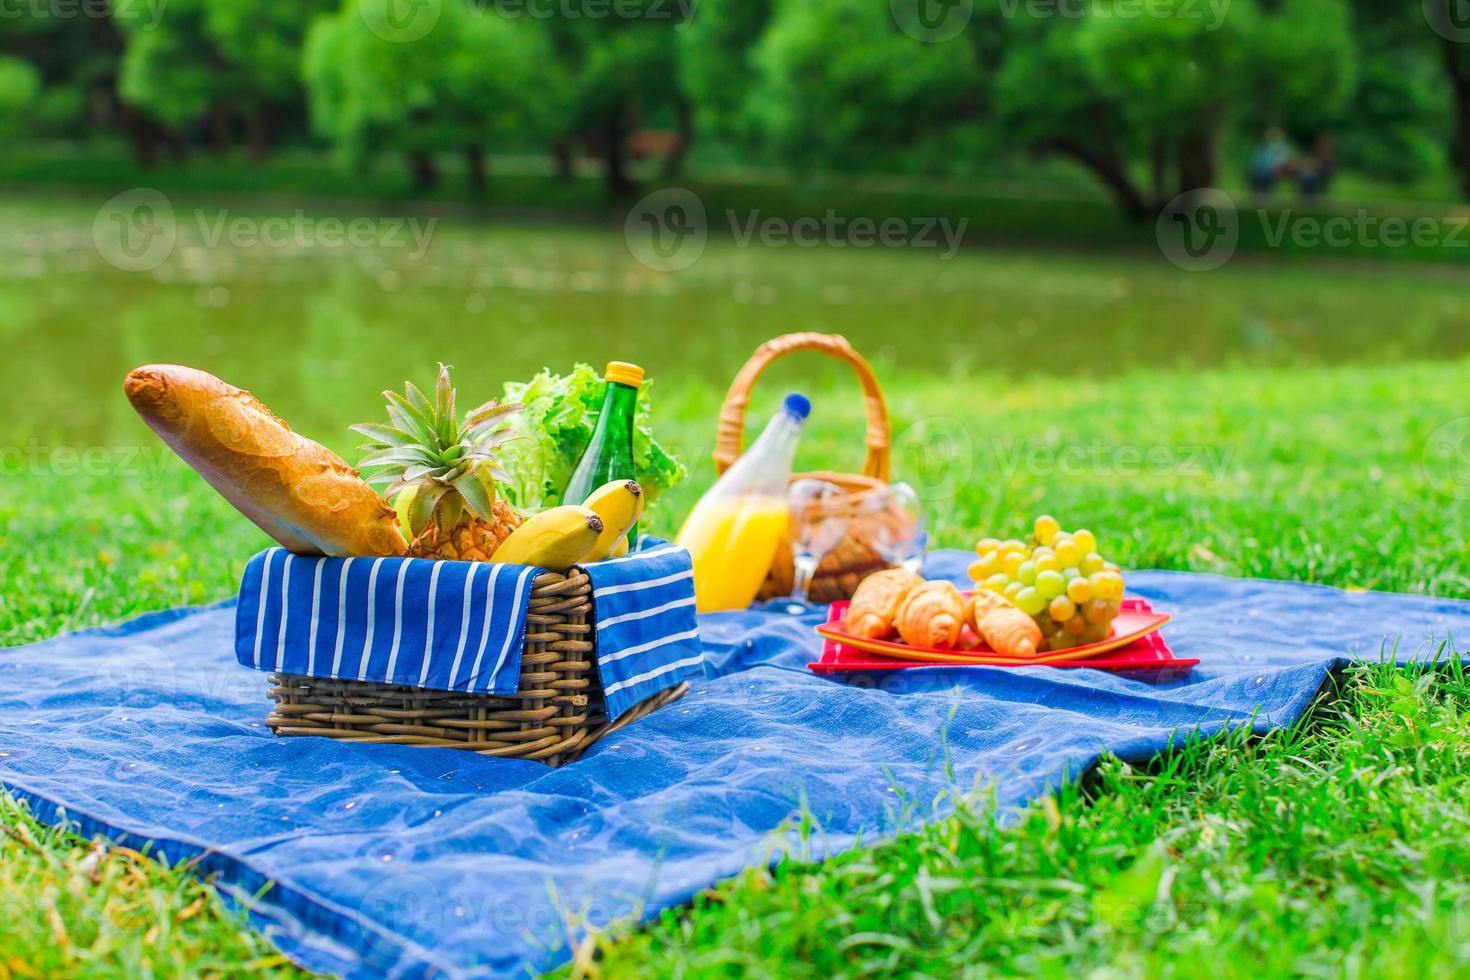 Picnic setting with white wine, pears, fruits, bread photo